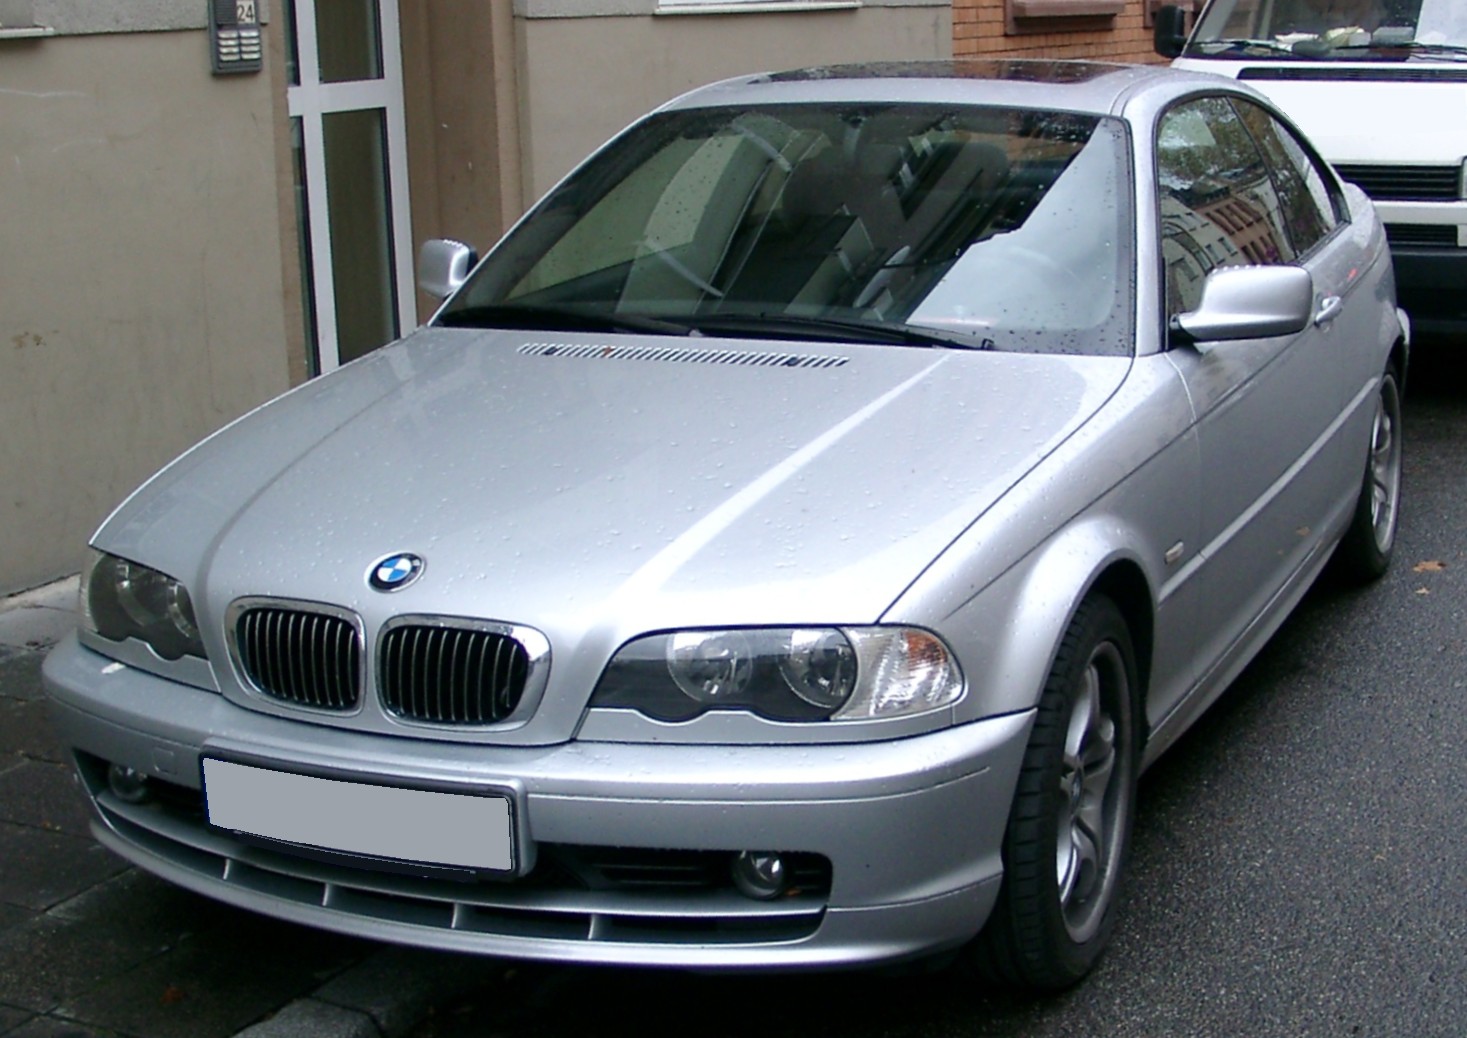 File:BMW E46 front 20071114.jpg - Wikimedia Commons